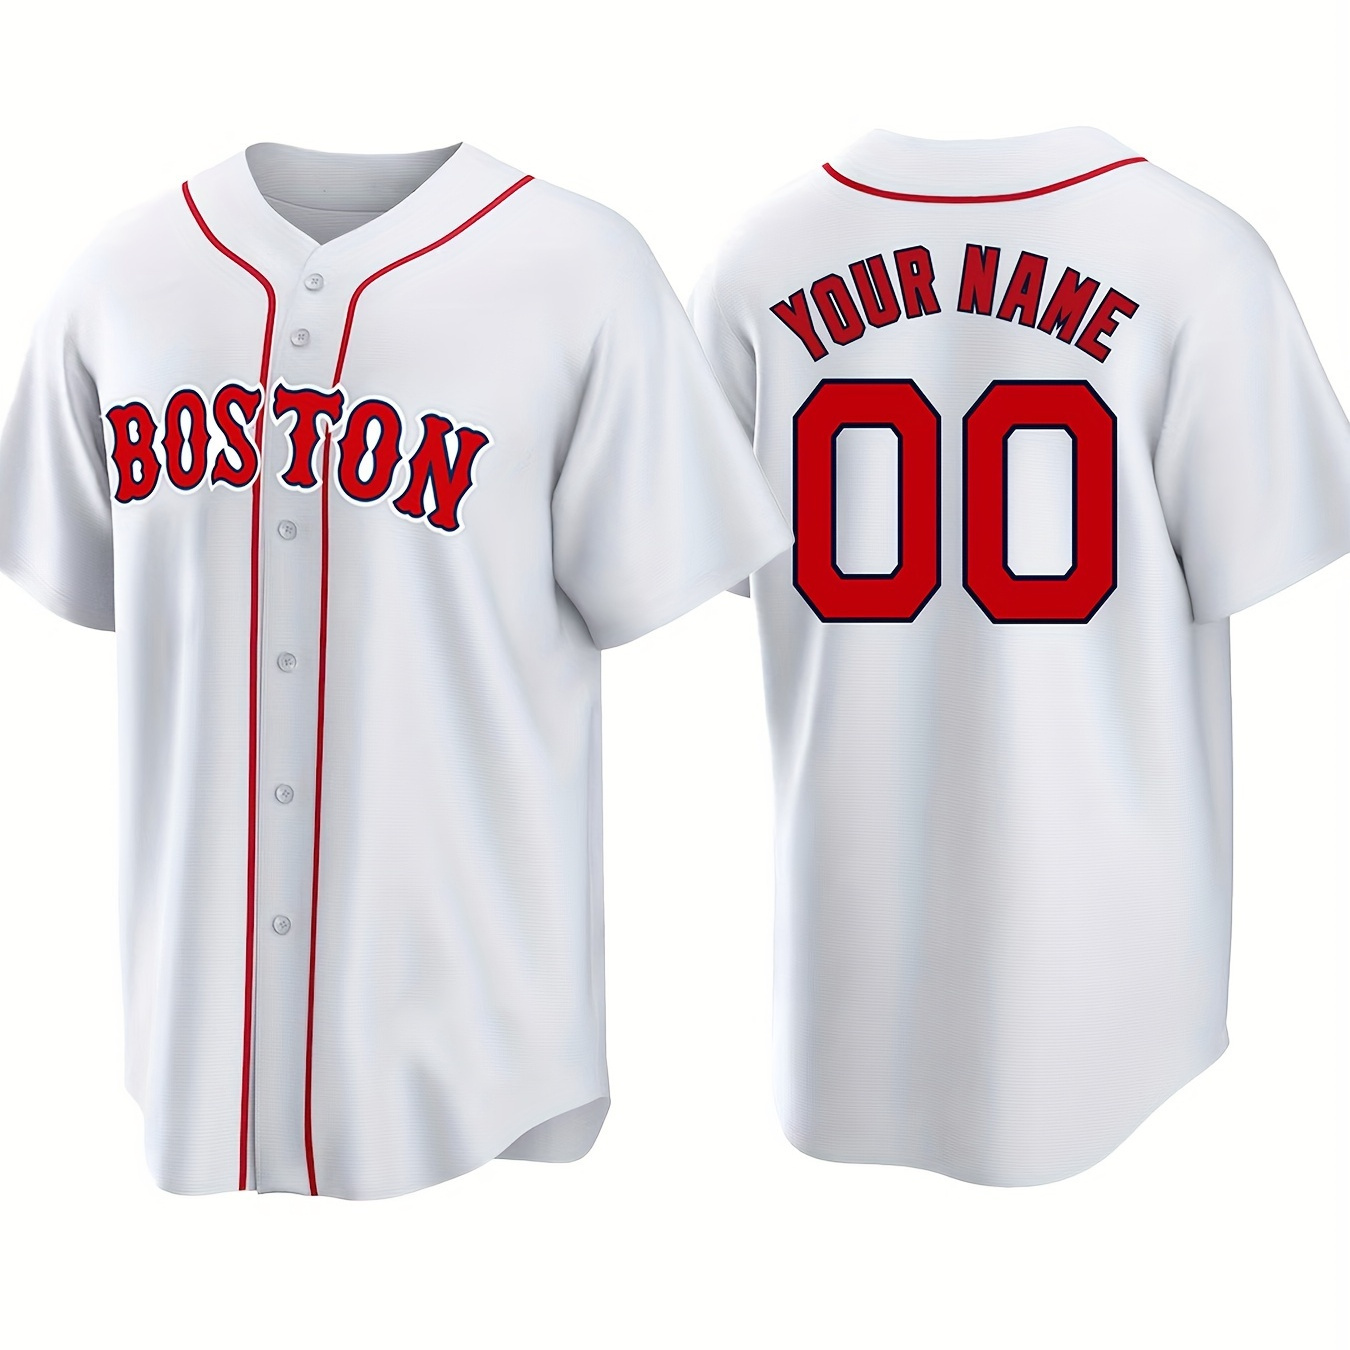 

Men's Customizable Name And Number Design Baseball Jersey Shirt, Boston Pattern Leisure Outdoor Sports Sweat Shirt For Match Party Training